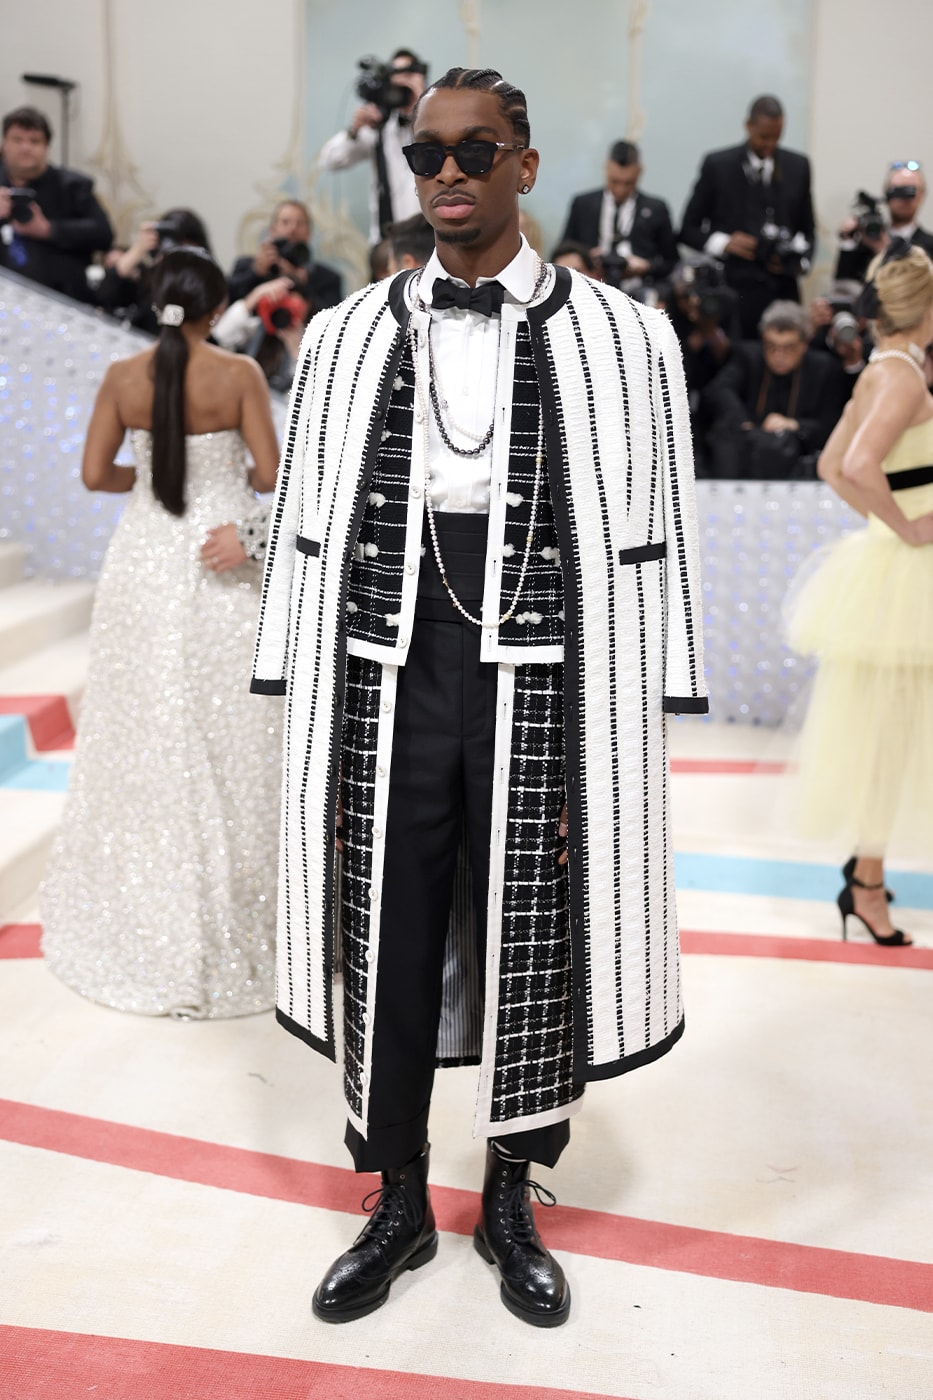 Most Talked About Moments at Met Gala 2023 | Hypebeast